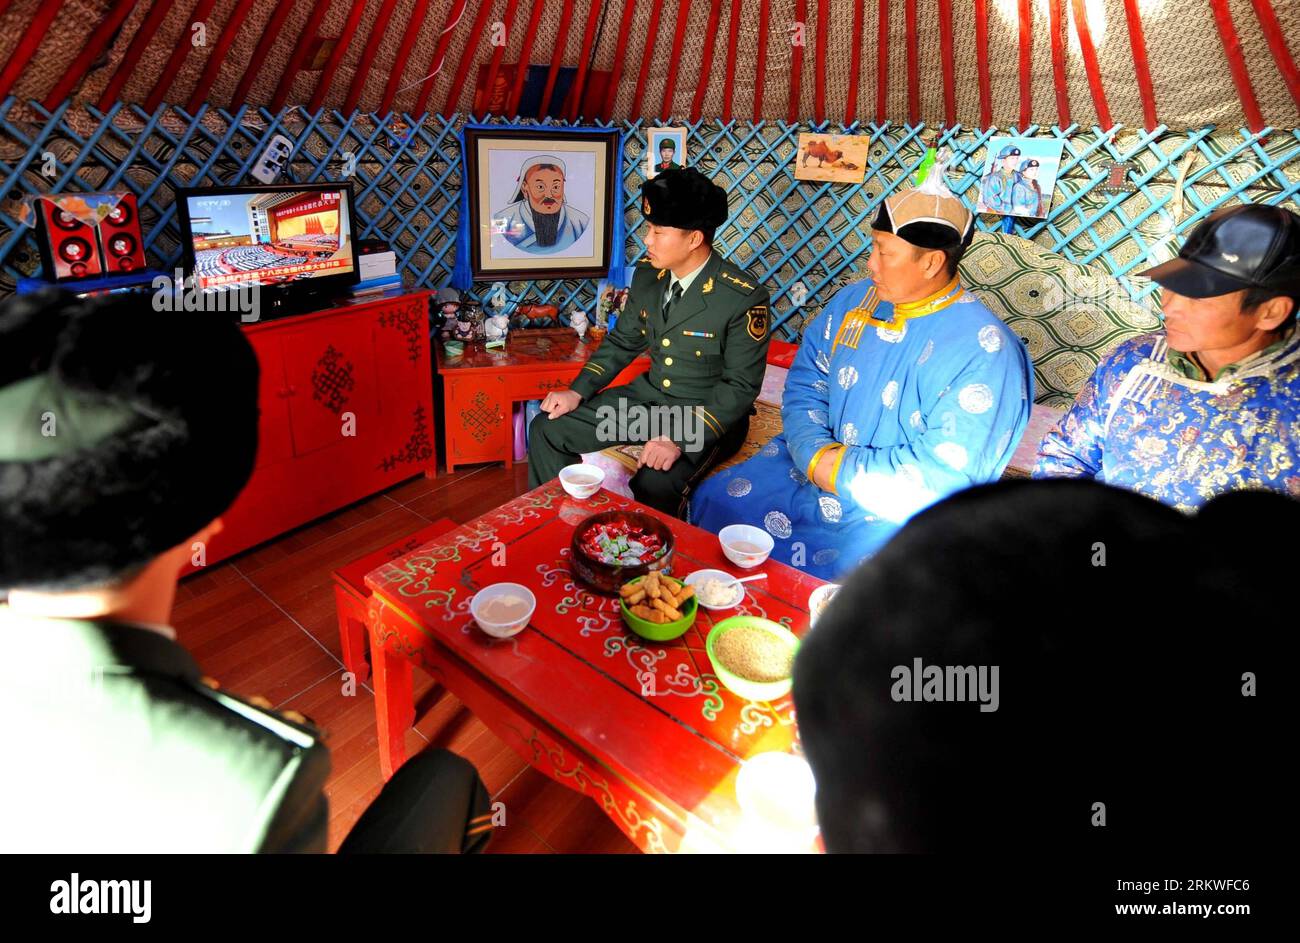 Bildnummer: 58678740  Datum: 08.11.2012  Copyright: imago/Xinhua (121108) -- SONID YOUQI, Nov. 8, 2012 (Xinhua) -- Police officers, along with herdsmen, watch live TV report on the opening ceremony of the 18th National Congress of the Communist Party of China (CPC) in Sonid Youqi Banner, north China s Inner Mongolia Autonomous Region, Nov. 8, 2012. The 18th CPC National Congress was opened in Beijing on Thursday. (Xinhua/Ren Junchuan)(hdt) (CPC CONGRESS) CHINA-18TH CPC NATIONAL CONGRESS (CN) PUBLICATIONxNOTxINxCHN Politik Parteitag xas x0x 2012 quer      58678740 Date 08 11 2012 Copyright Imag Stock Photo